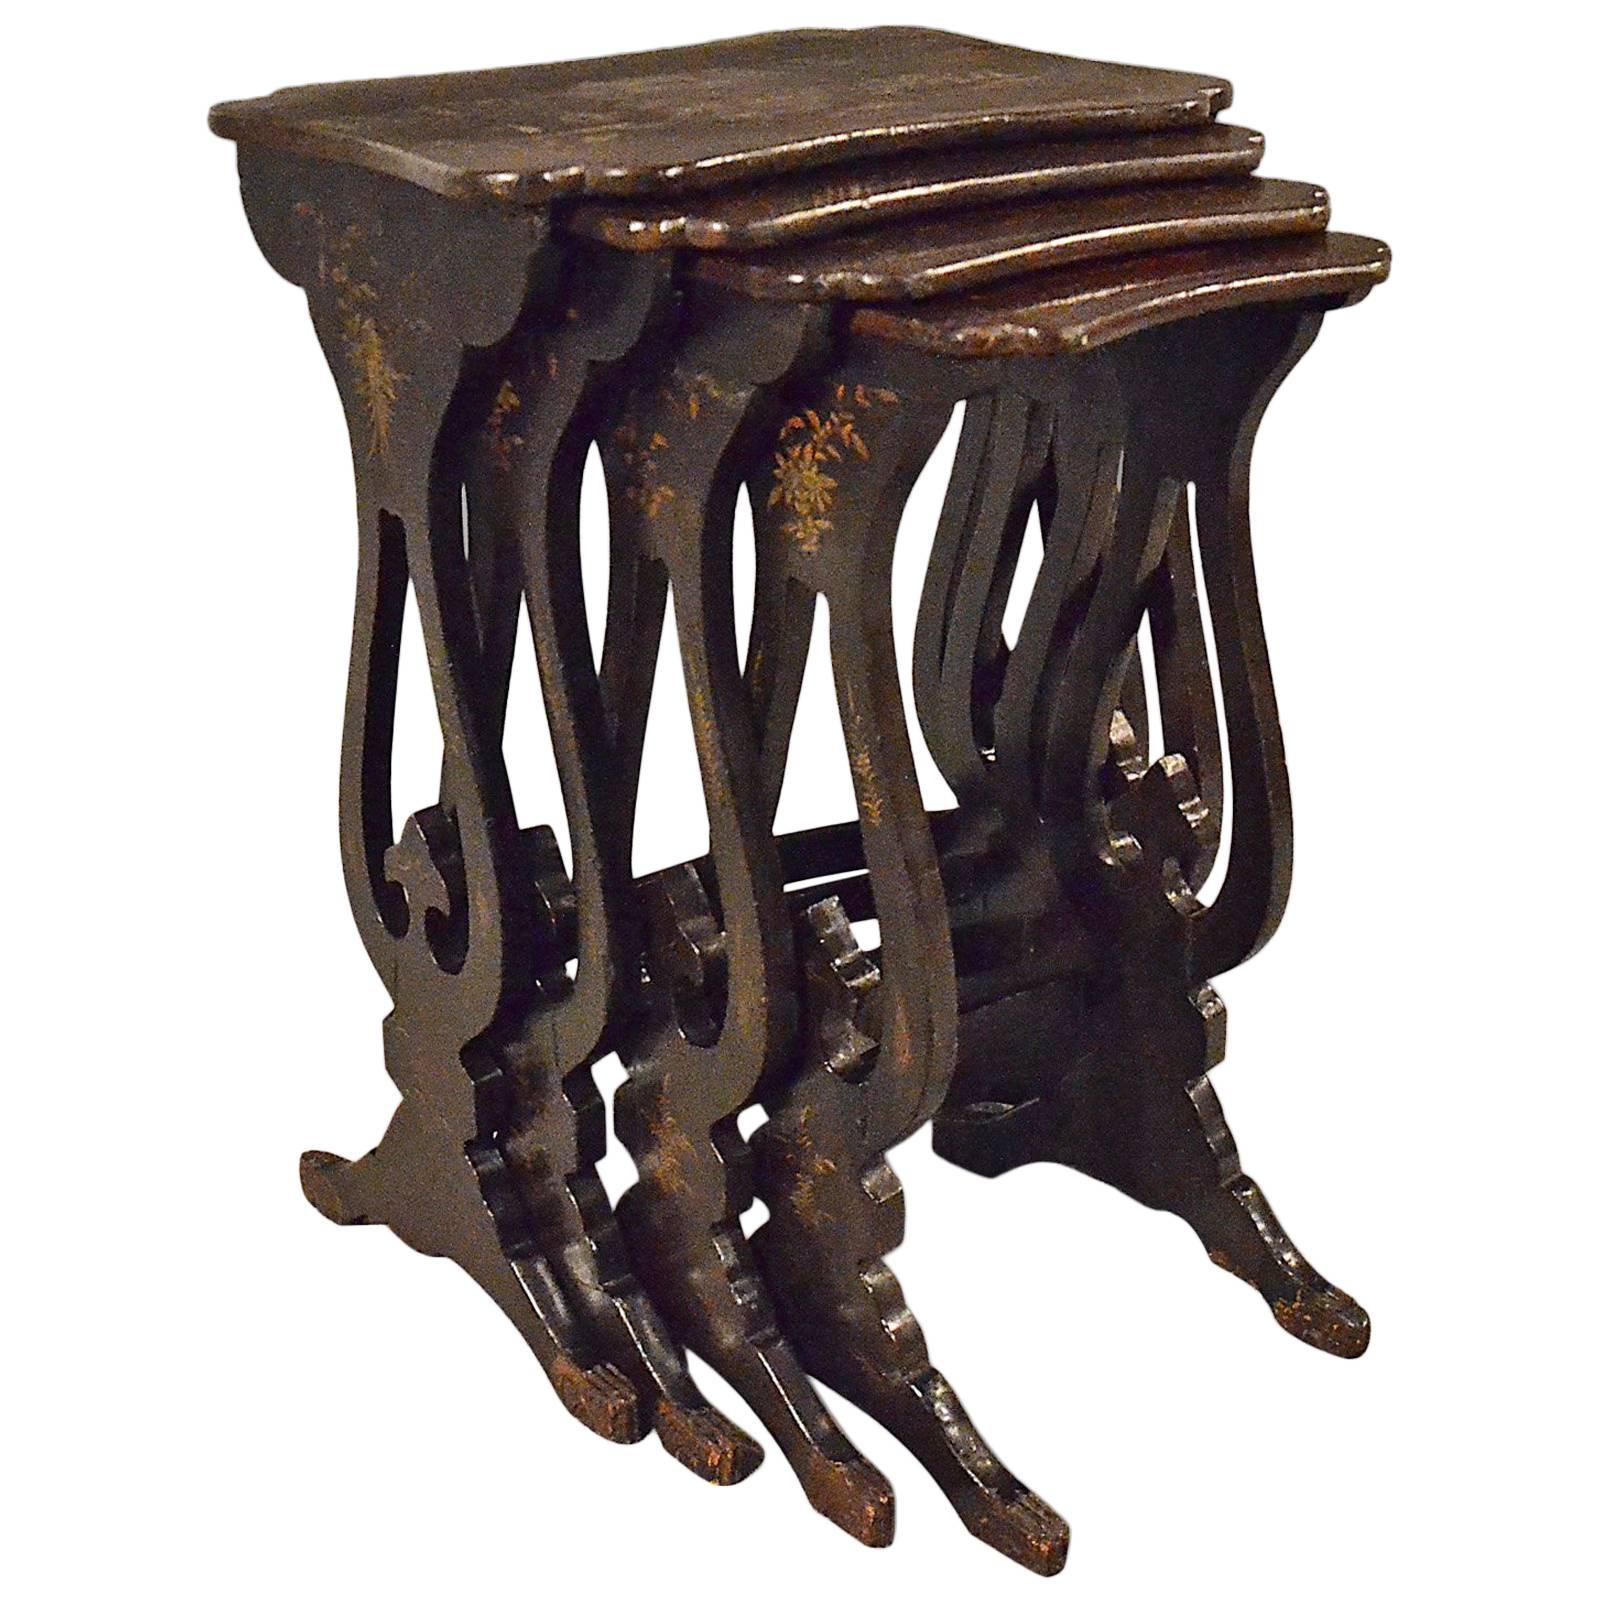 Antique Nest of Tables, Four Chinoiserie Side Tables, 19th Century, circa 1890